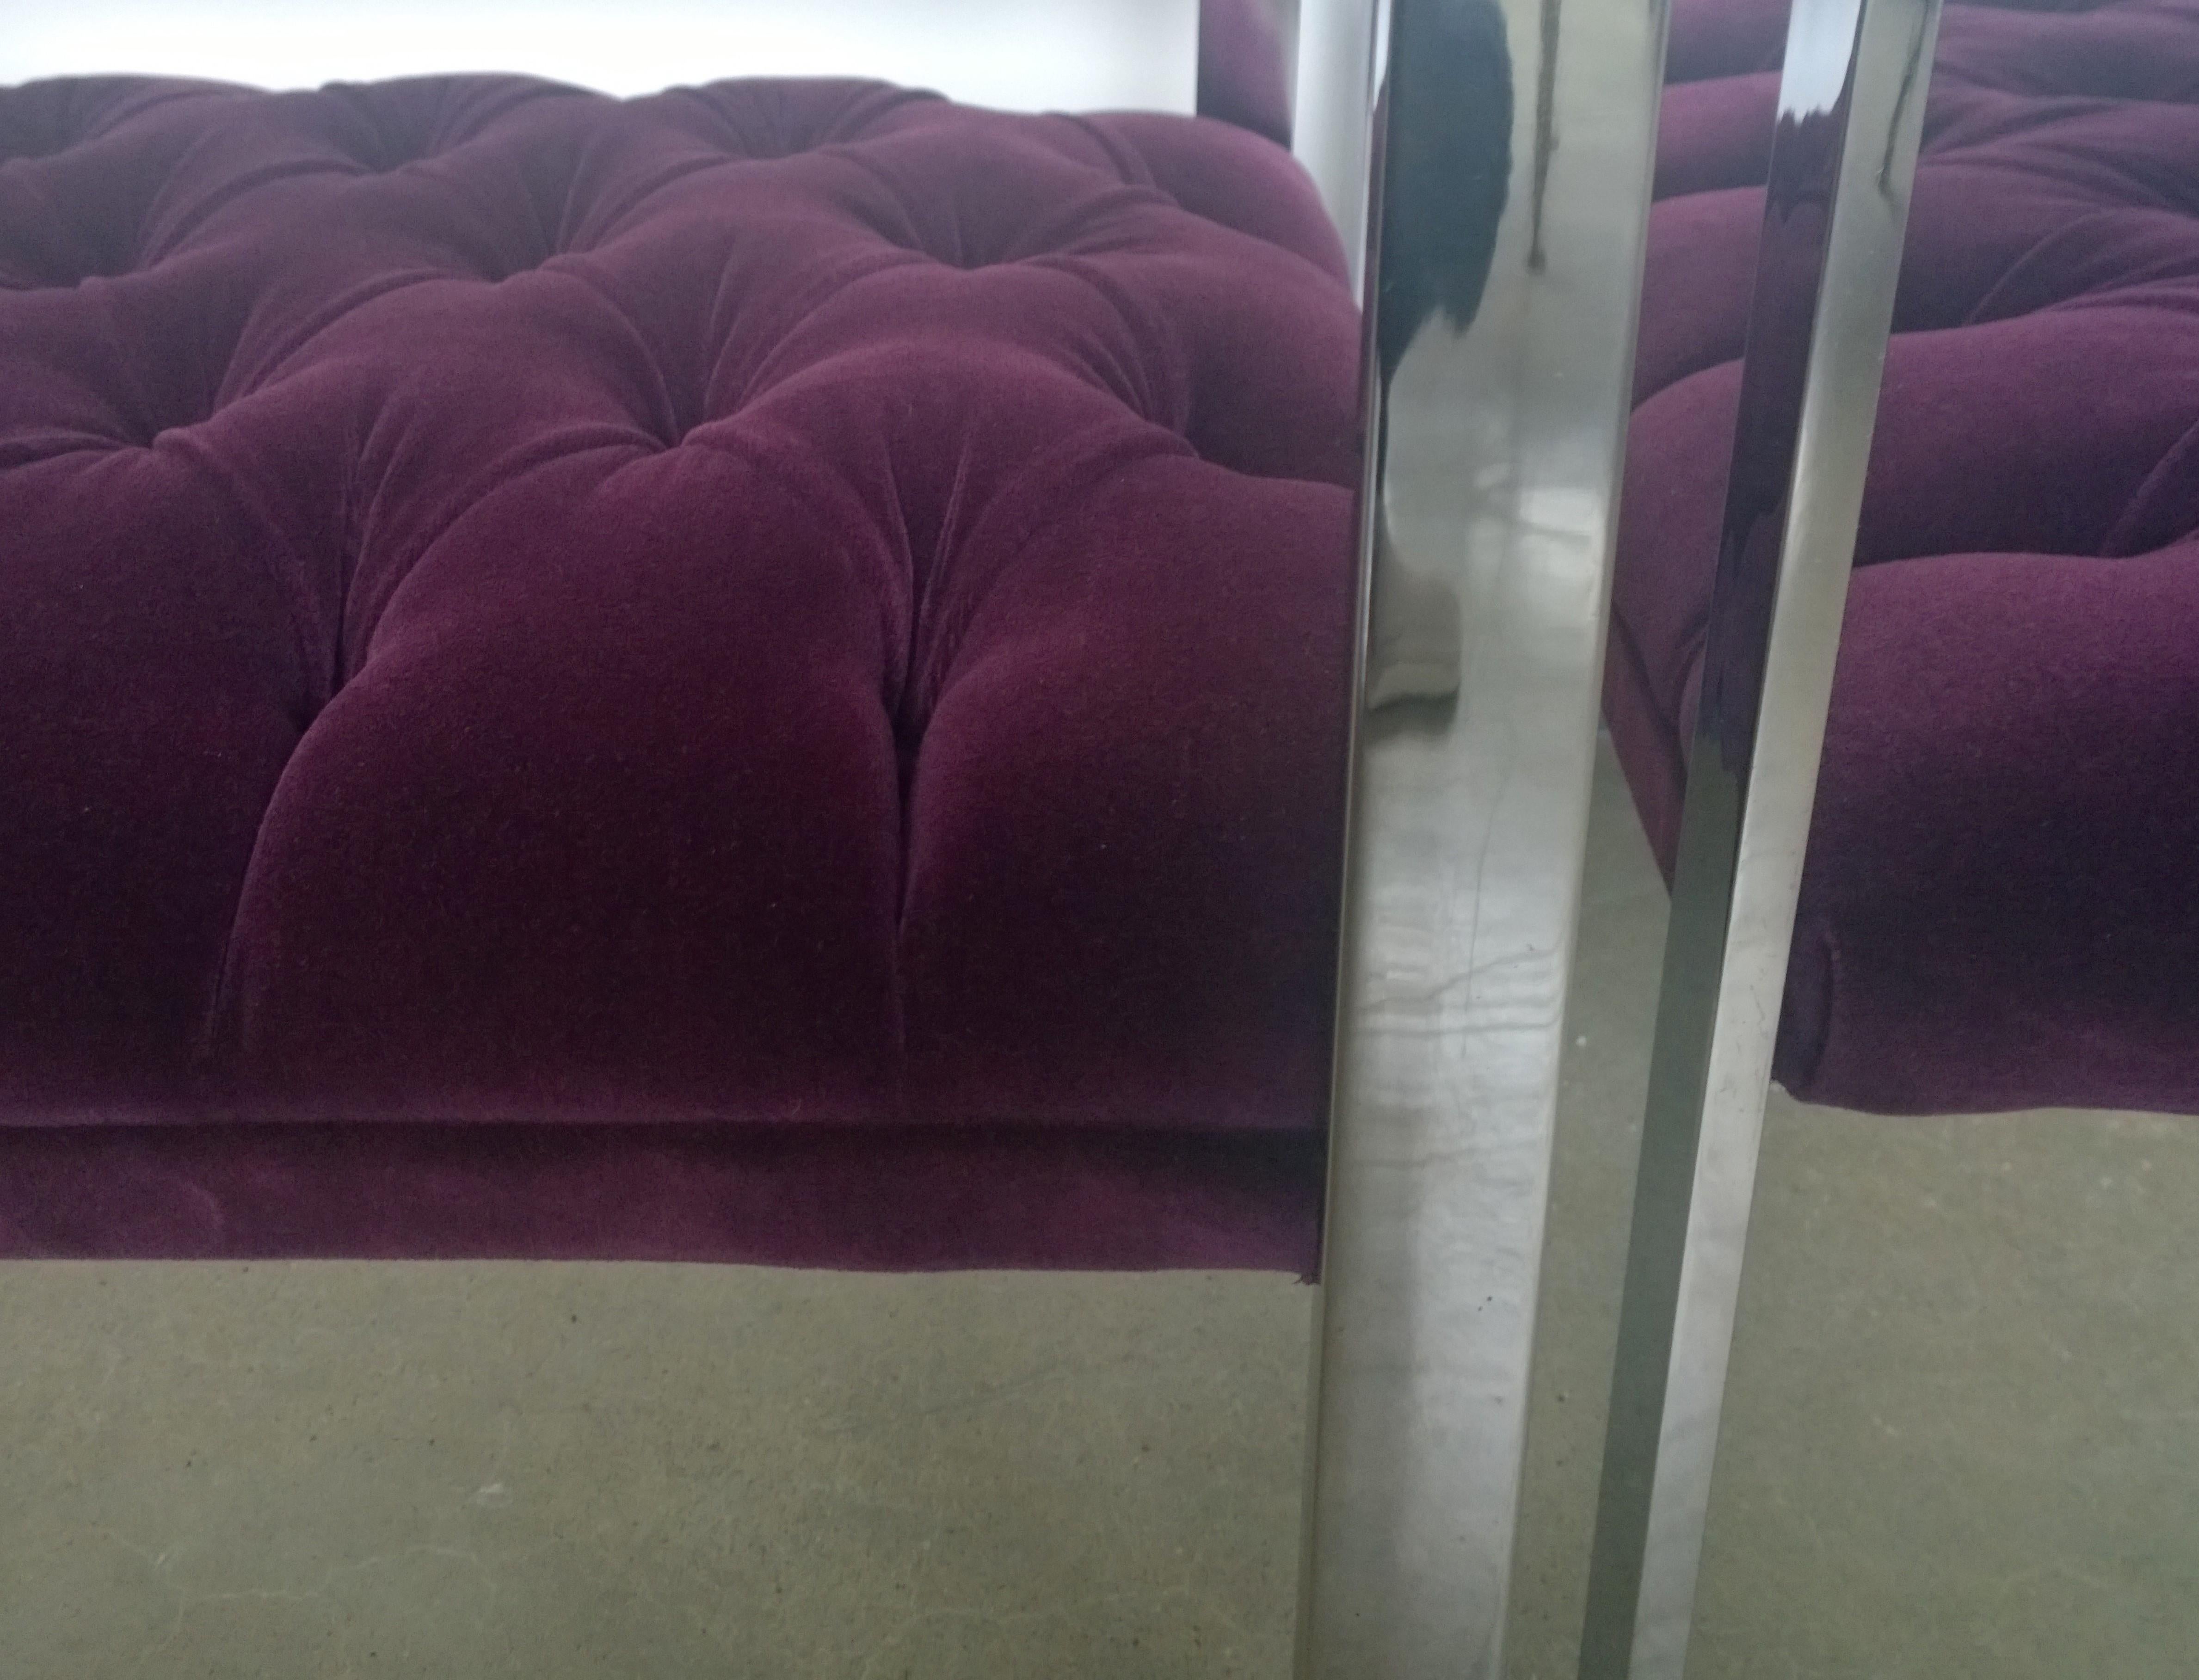 Pair of Erwin-Lambeth Chrome and New Deep Purple Velvet Tufted Arm Lounge Chairs For Sale 5